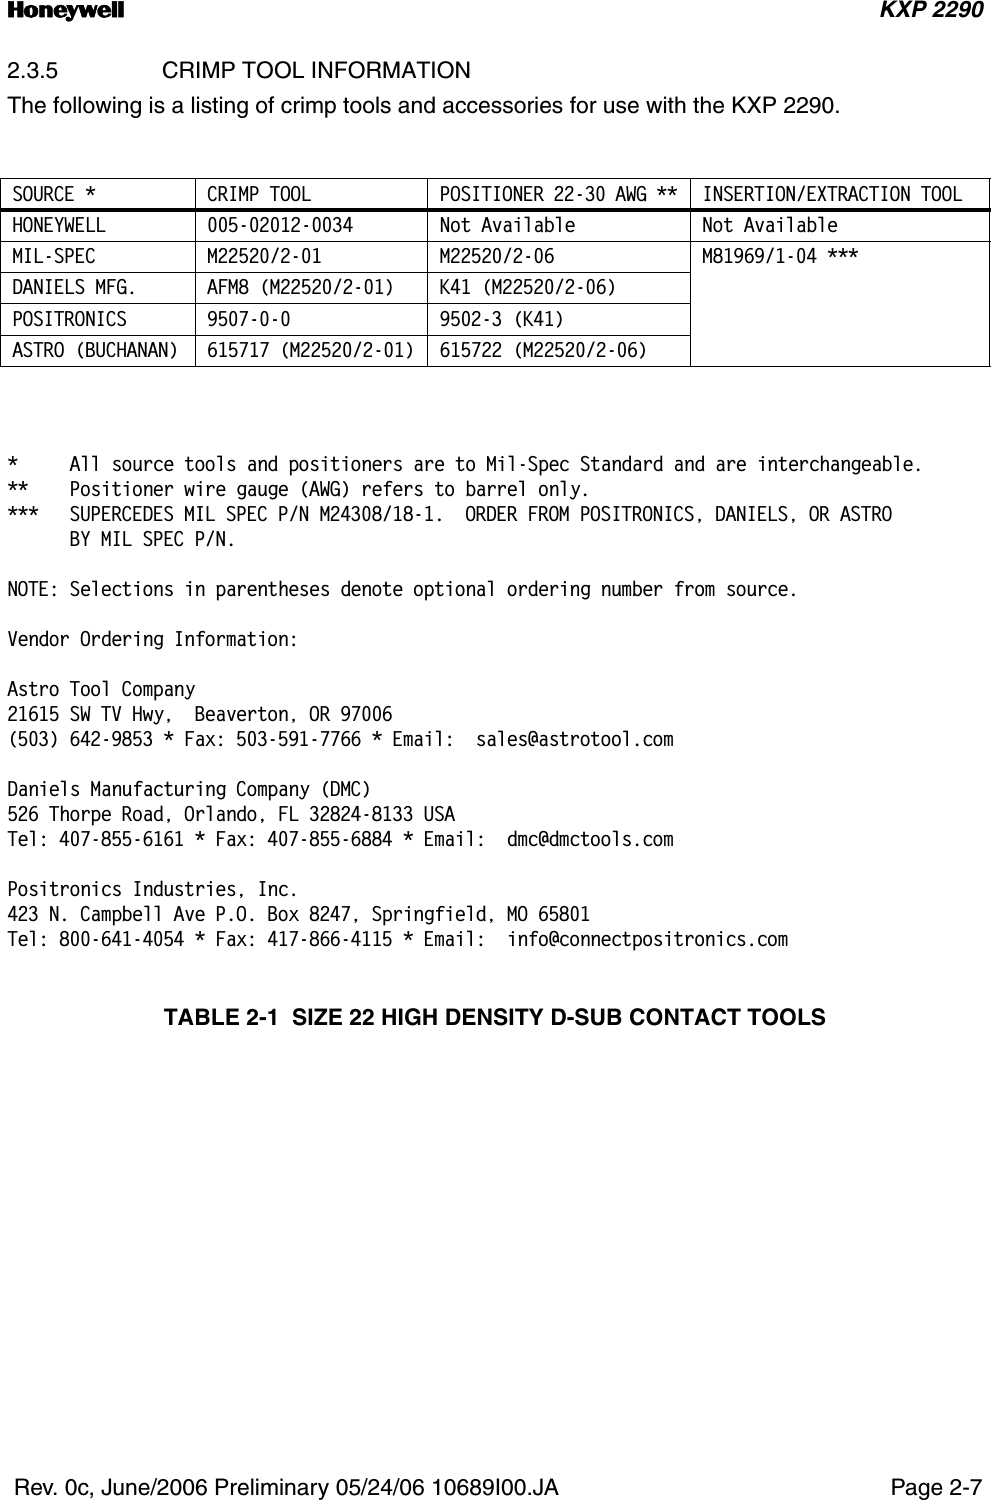 n KXP 2290 Rev. 0c, June/2006 Preliminary 05/24/06 10689I00.JA Page 2-72.3.5 CRIMP TOOL INFORMATIONThe following is a listing of crimp tools and accessories for use with the KXP 2290.*     All source tools and positioners are to Mil-Spec Standard and are interchangeable.**    Positioner wire gauge (AWG) refers to barrel only.***   SUPERCEDES MIL SPEC P/N M24308/18-1.  ORDER FROM POSITRONICS, DANIELS, OR ASTRO      BY MIL SPEC P/N.NOTE: Selections in parentheses denote optional ordering number from source.Vendor Ordering Information:Astro Tool Company21615 SW TV Hwy,  Beaverton, OR 97006(503) 642-9853 * Fax: 503-591-7766 * Email:  sales@astrotool.comDaniels Manufacturing Company (DMC)526 Thorpe Road, Orlando, FL 32824-8133 USATel: 407-855-6161 * Fax: 407-855-6884 * Email:  dmc@dmctools.comPositronics Industries, Inc.423 N. Campbell Ave P.O. Box 8247, Springfield, MO 65801Tel: 800-641-4054 * Fax: 417-866-4115 * Email:  info@connectpositronics.comTABLE 2-1  SIZE 22 HIGH DENSITY D-SUB CONTACT TOOLSSOURCE * CRIMP TOOL POSITIONER 22-30 AWG ** INSERTION/EXTRACTION TOOLHONEYWELL 005-02012-0034 Not Available Not AvailableMIL-SPEC M22520/2-01 M22520/2-06 M81969/1-04 ***DANIELS MFG. AFM8 (M22520/2-01) K41 (M22520/2-06)POSITRONICS 9507-0-0 9502-3 (K41)ASTRO (BUCHANAN) 615717 (M22520/2-01) 615722 (M22520/2-06)